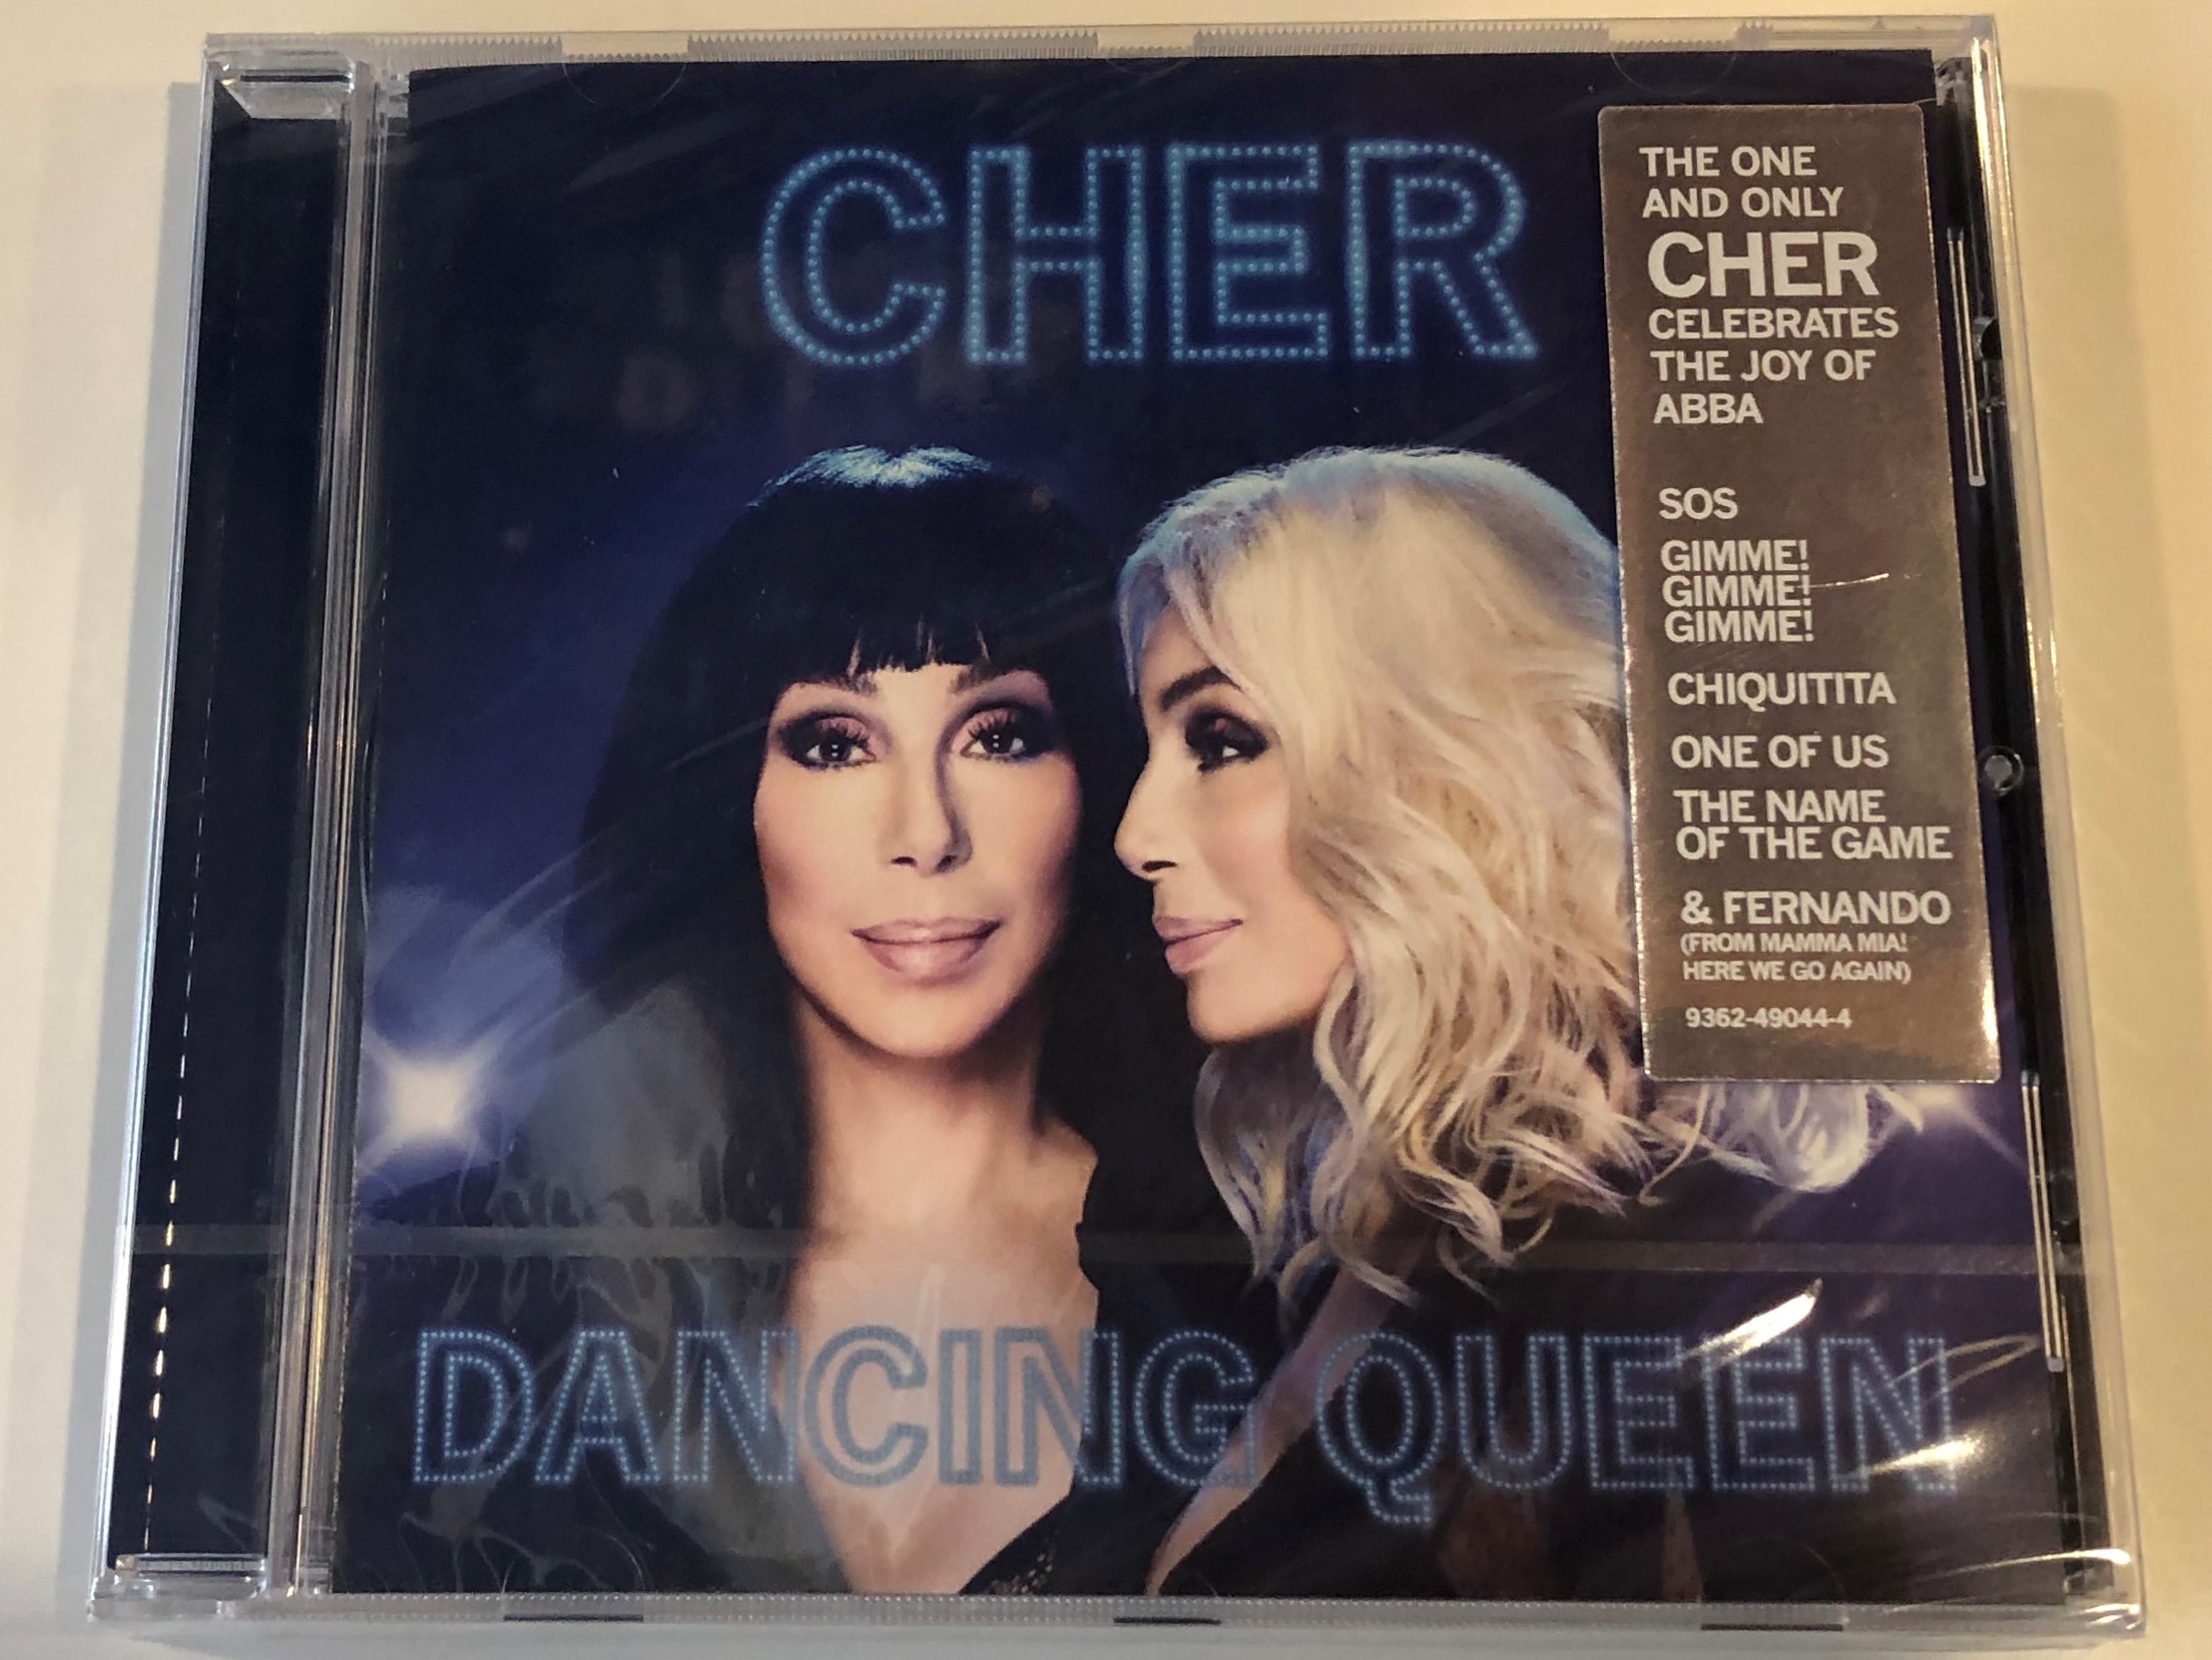 cher-dancing-queen-sos-gimme-gimme-gimme-chiquitita-one-of-us-the-name-of-the-game-fernando-from-mamma-mia-here-we-go-again-warner-bros.-records-audio-cd-2018-9362-49044-4-1-.jpg